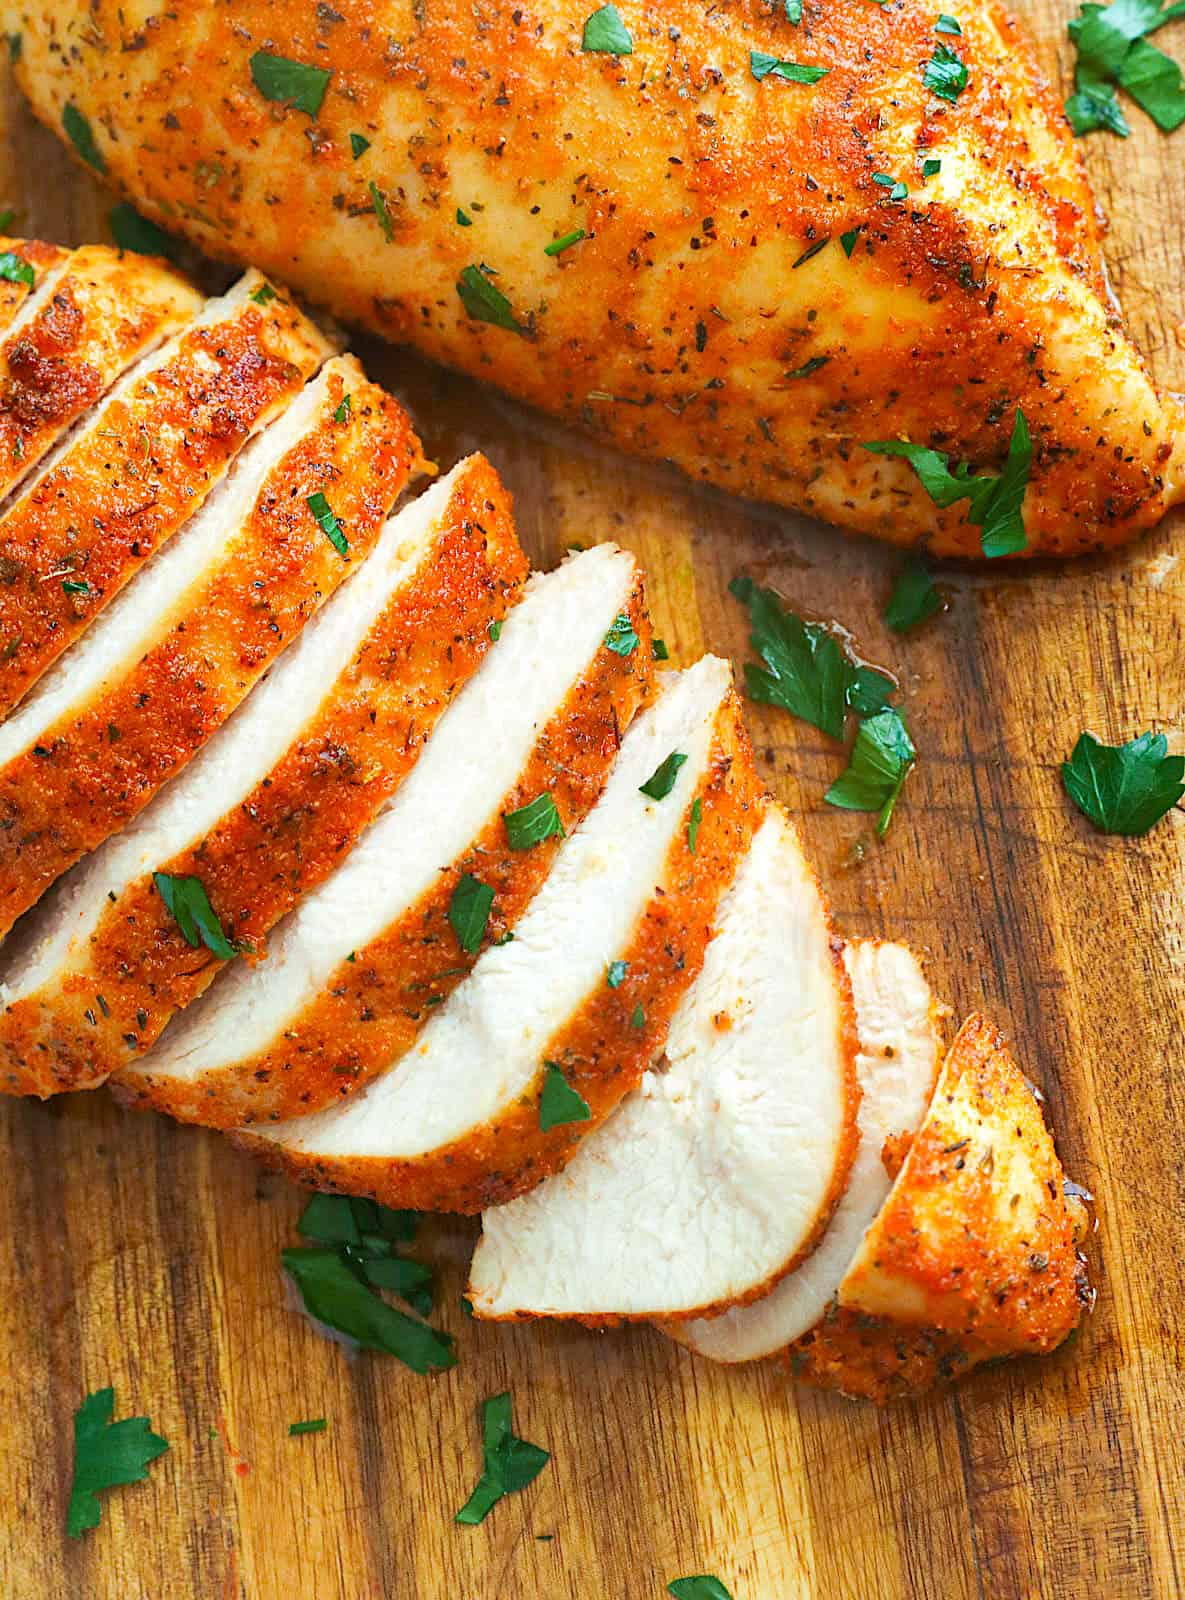 Slicing freshly baked chicken breasts